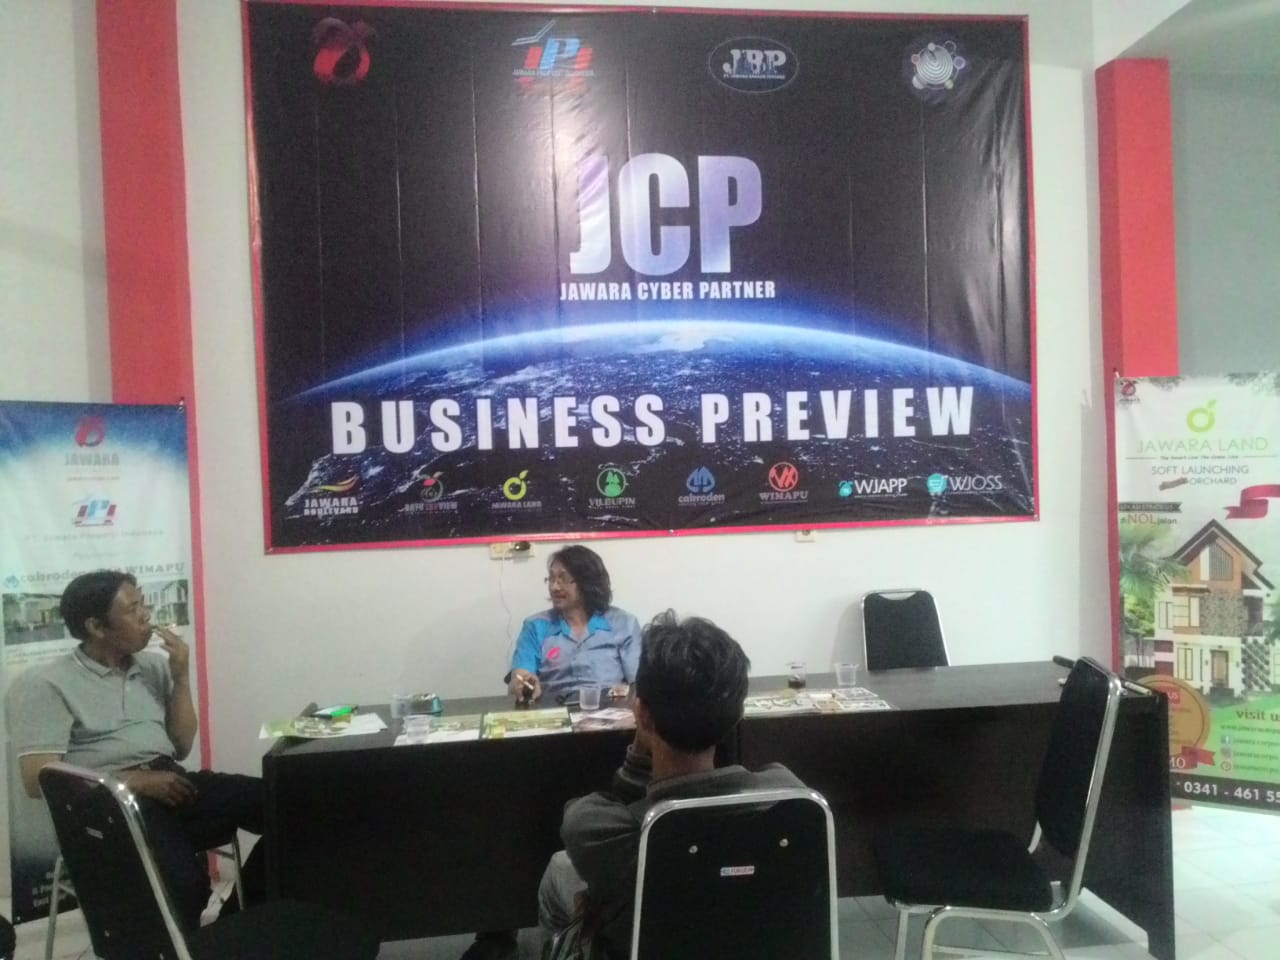 Bussiness Preview Jawara Cyber Partner